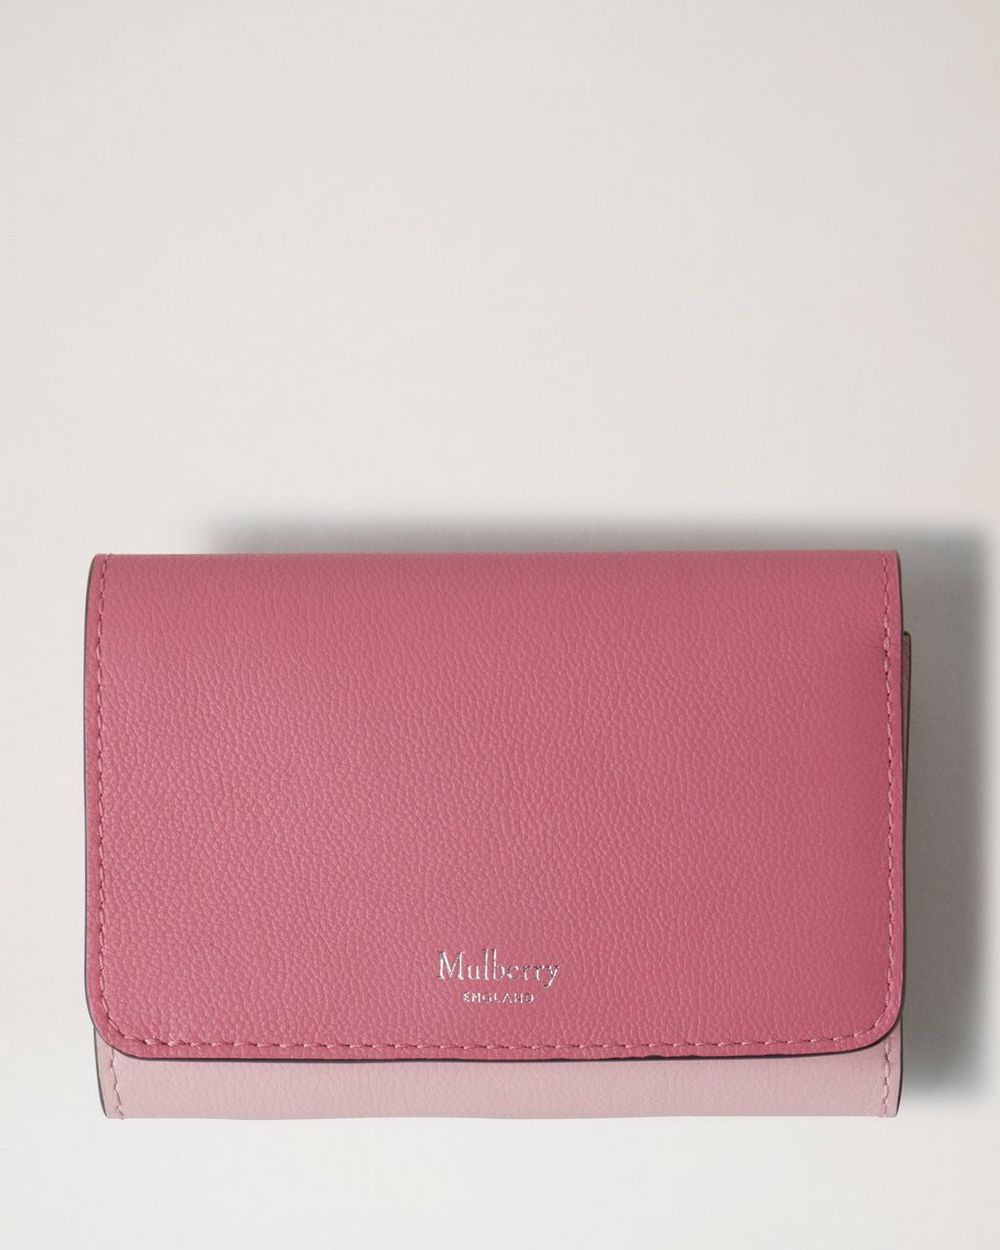 Mulberry French purse wallet what you can fit inside it and red